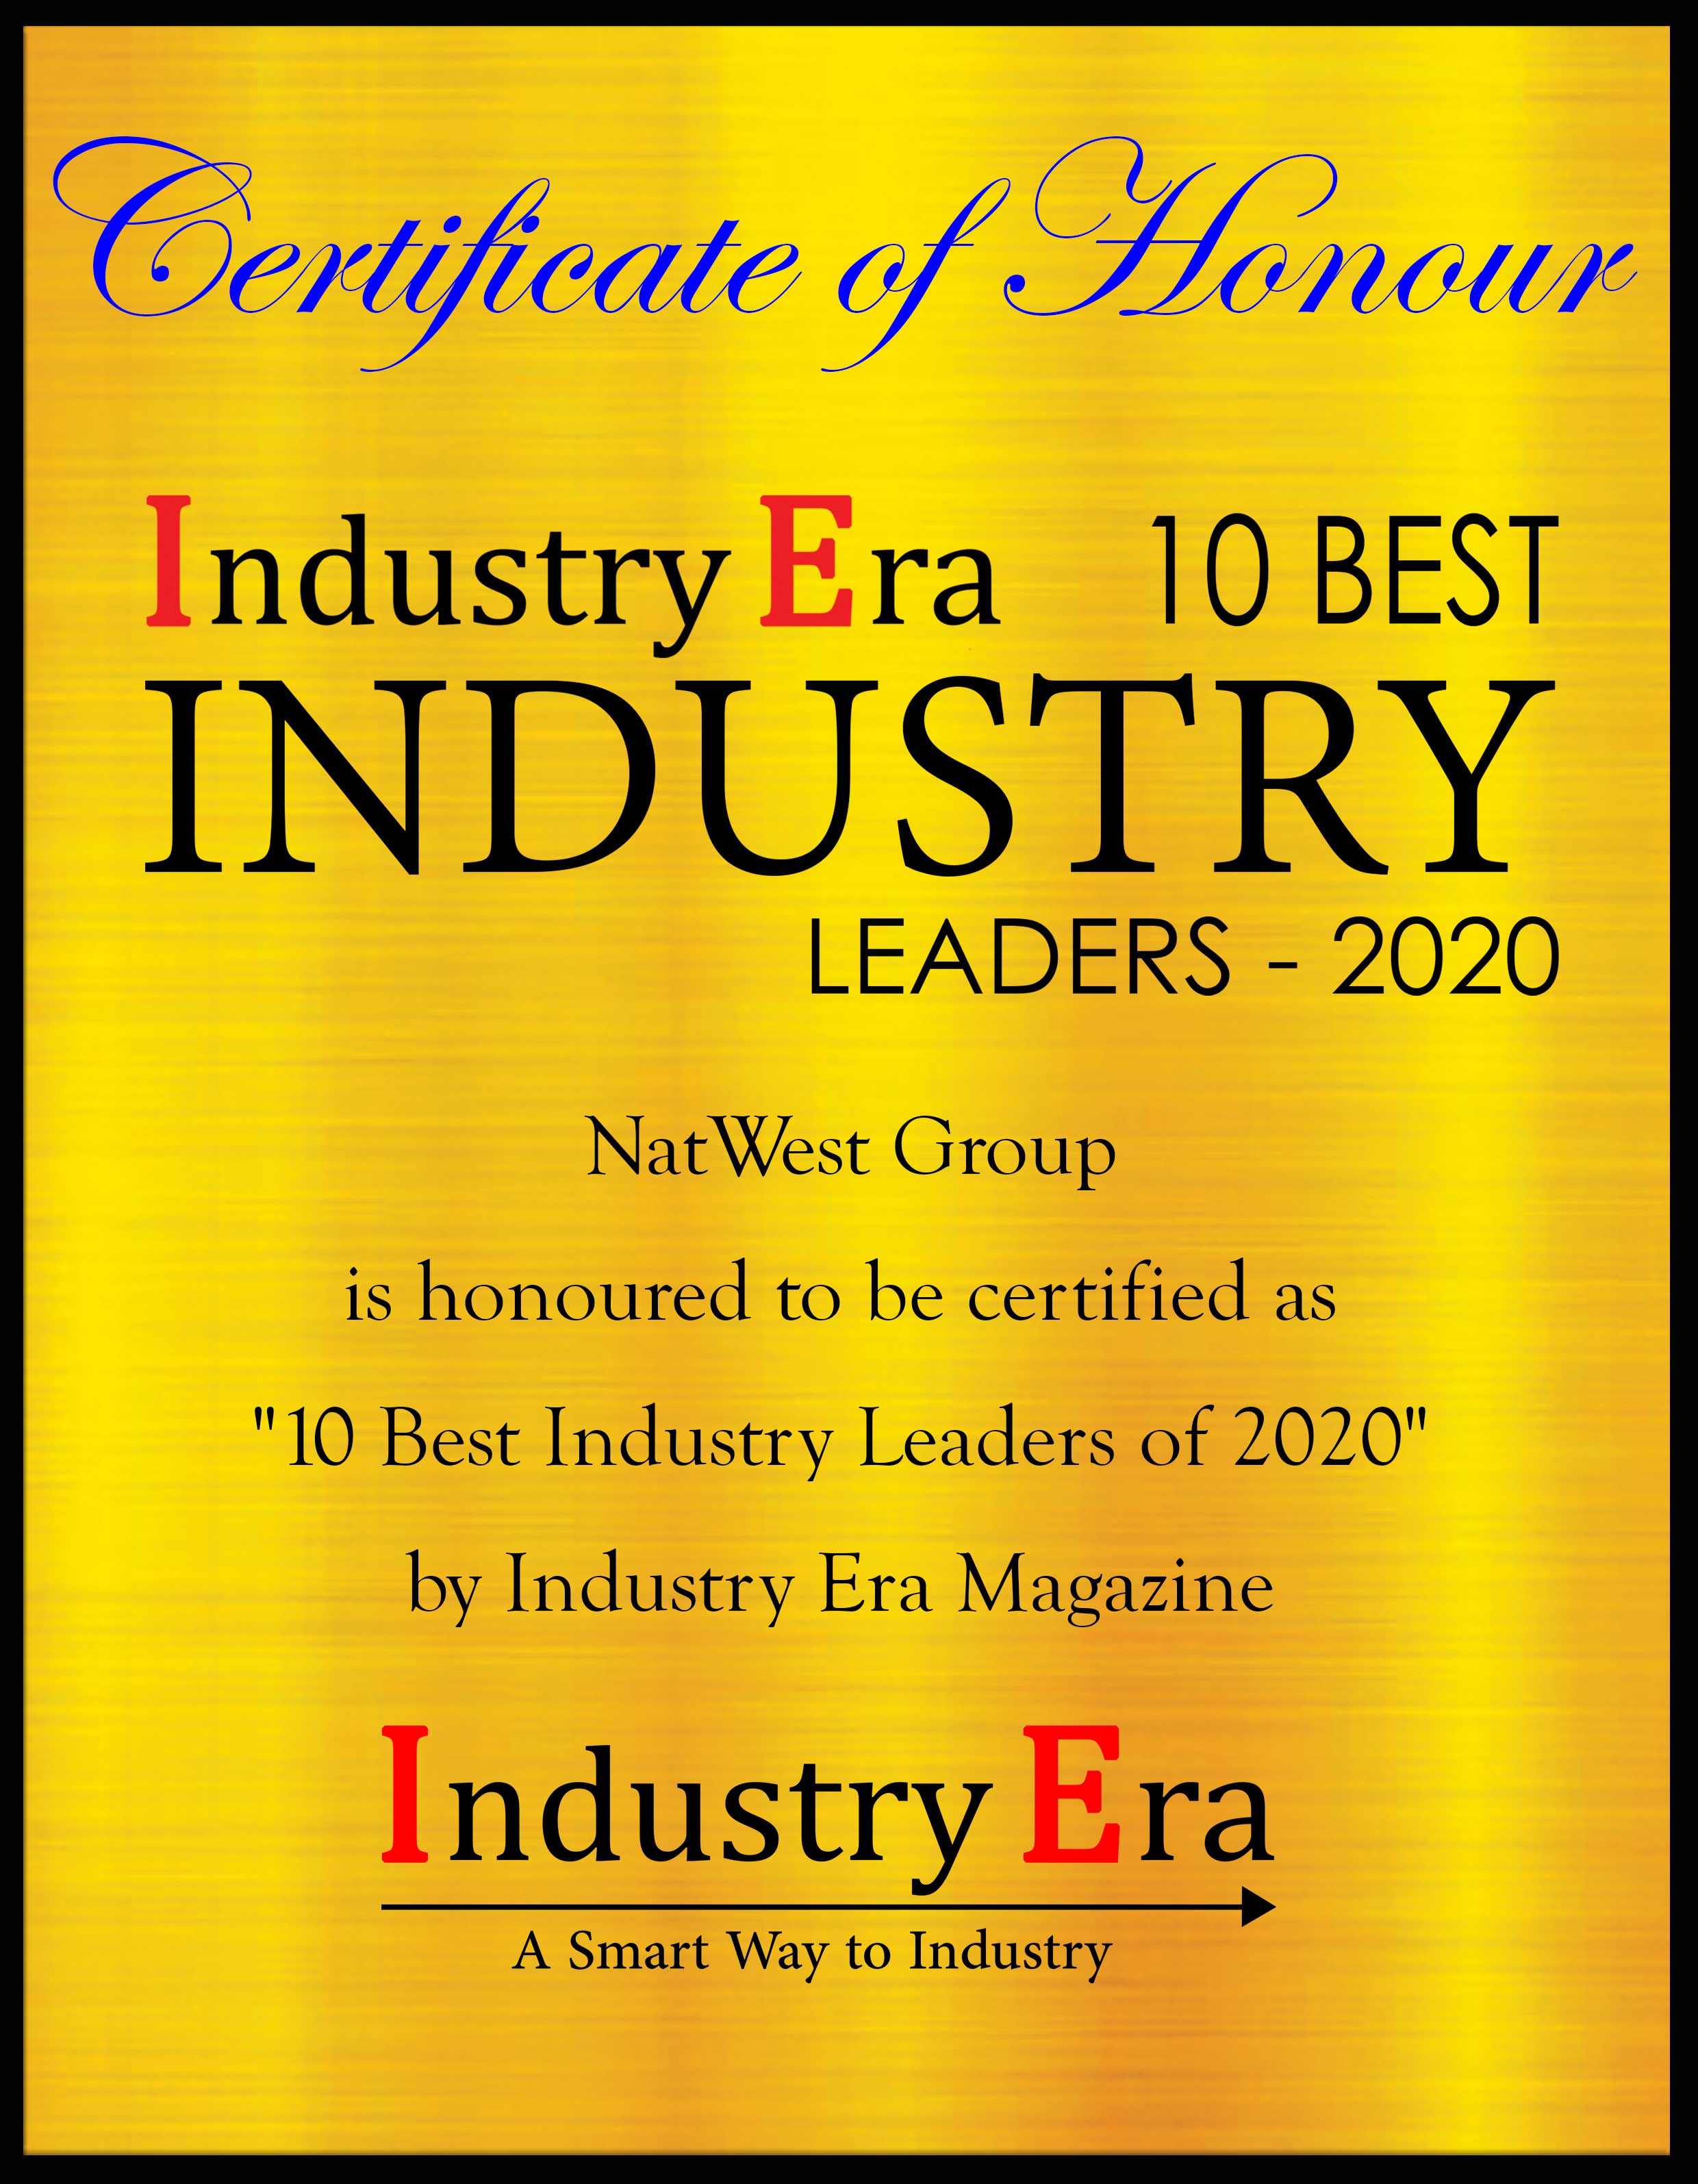 Wendy Redshaw, Chief Digital Information Officer of NatWest Group Certificate